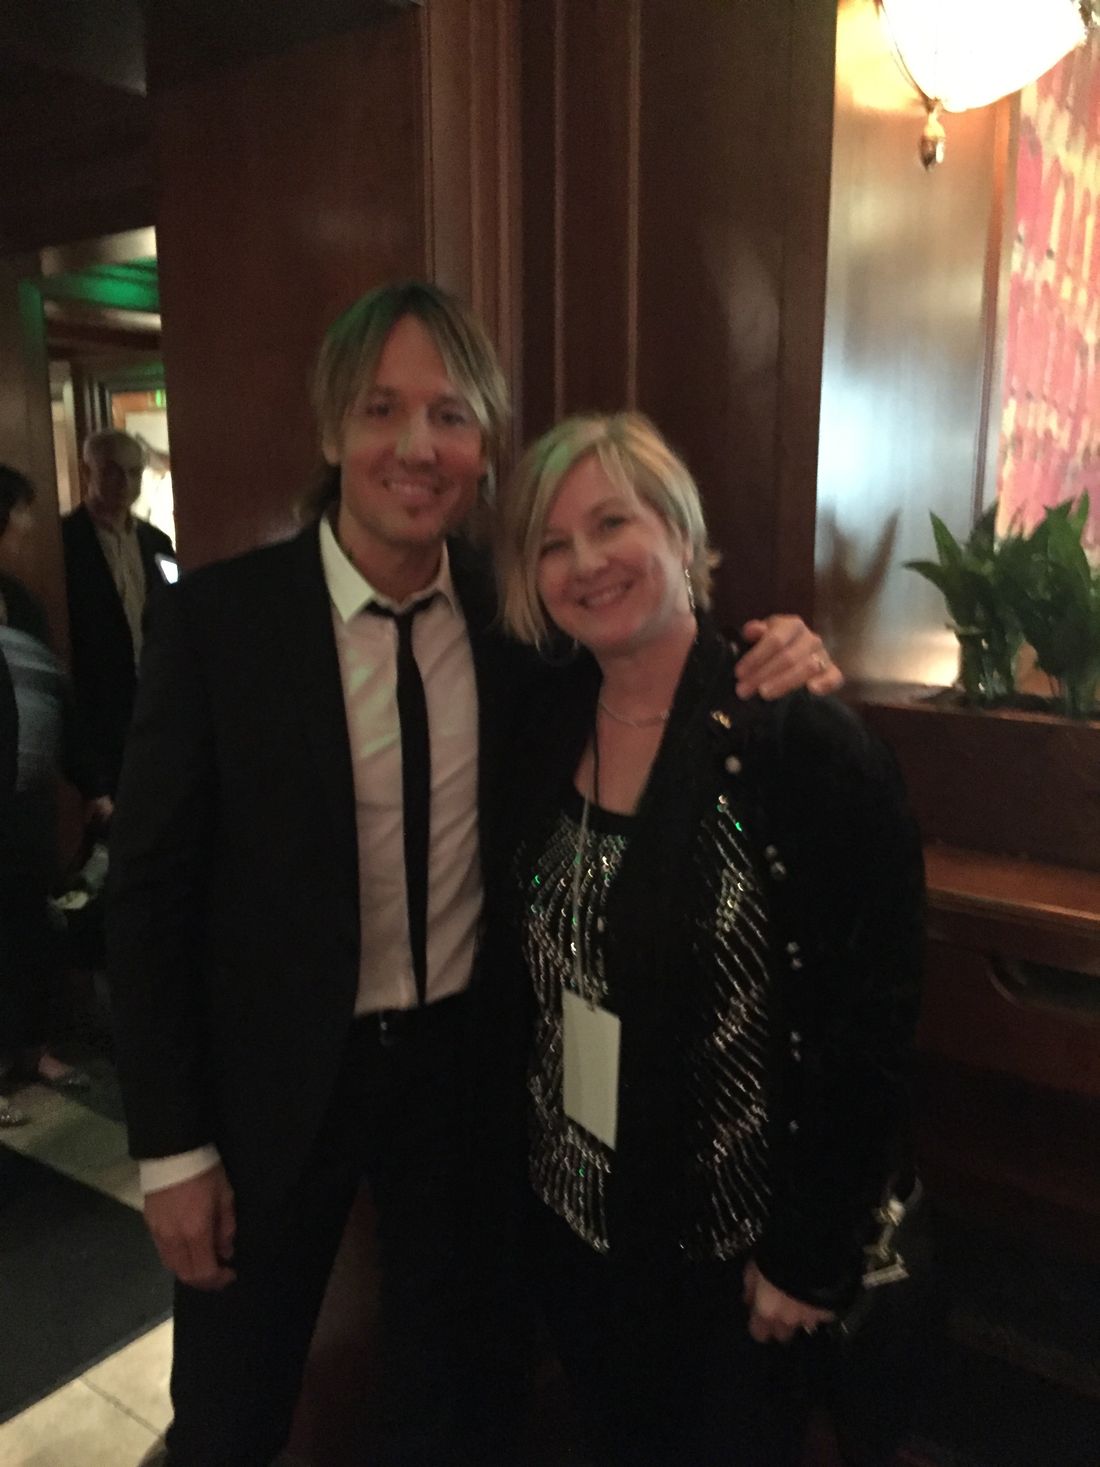 Keith Urban @ Grammys on the Hill
